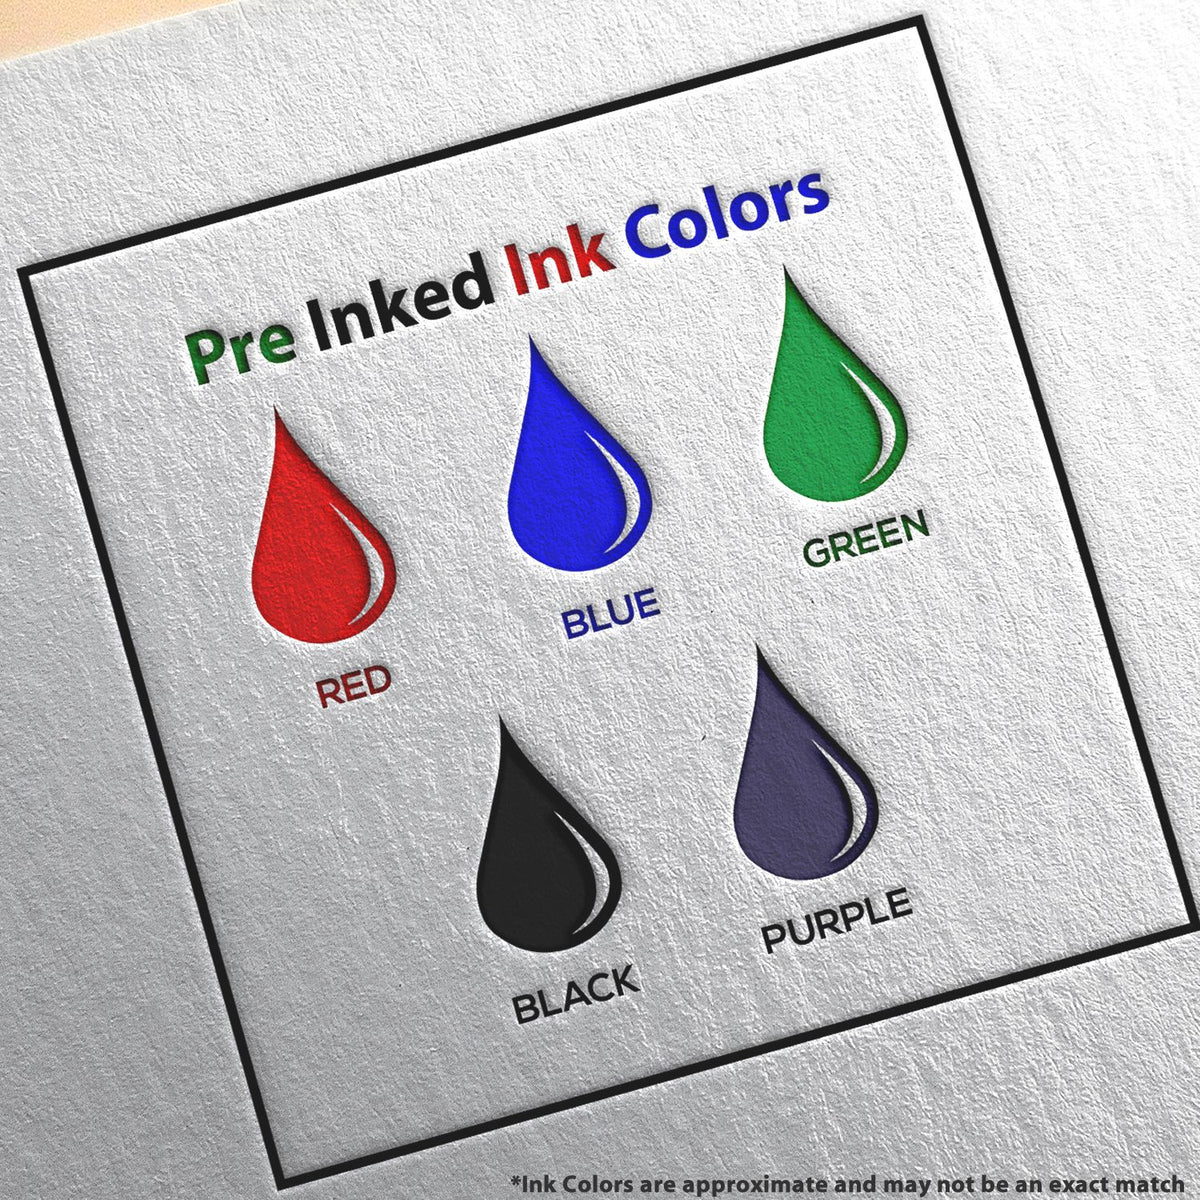 A picture showing the different ink colors or hues available for the Slim Pre-Inked Illinois Landscape Architect Seal Stamp product.